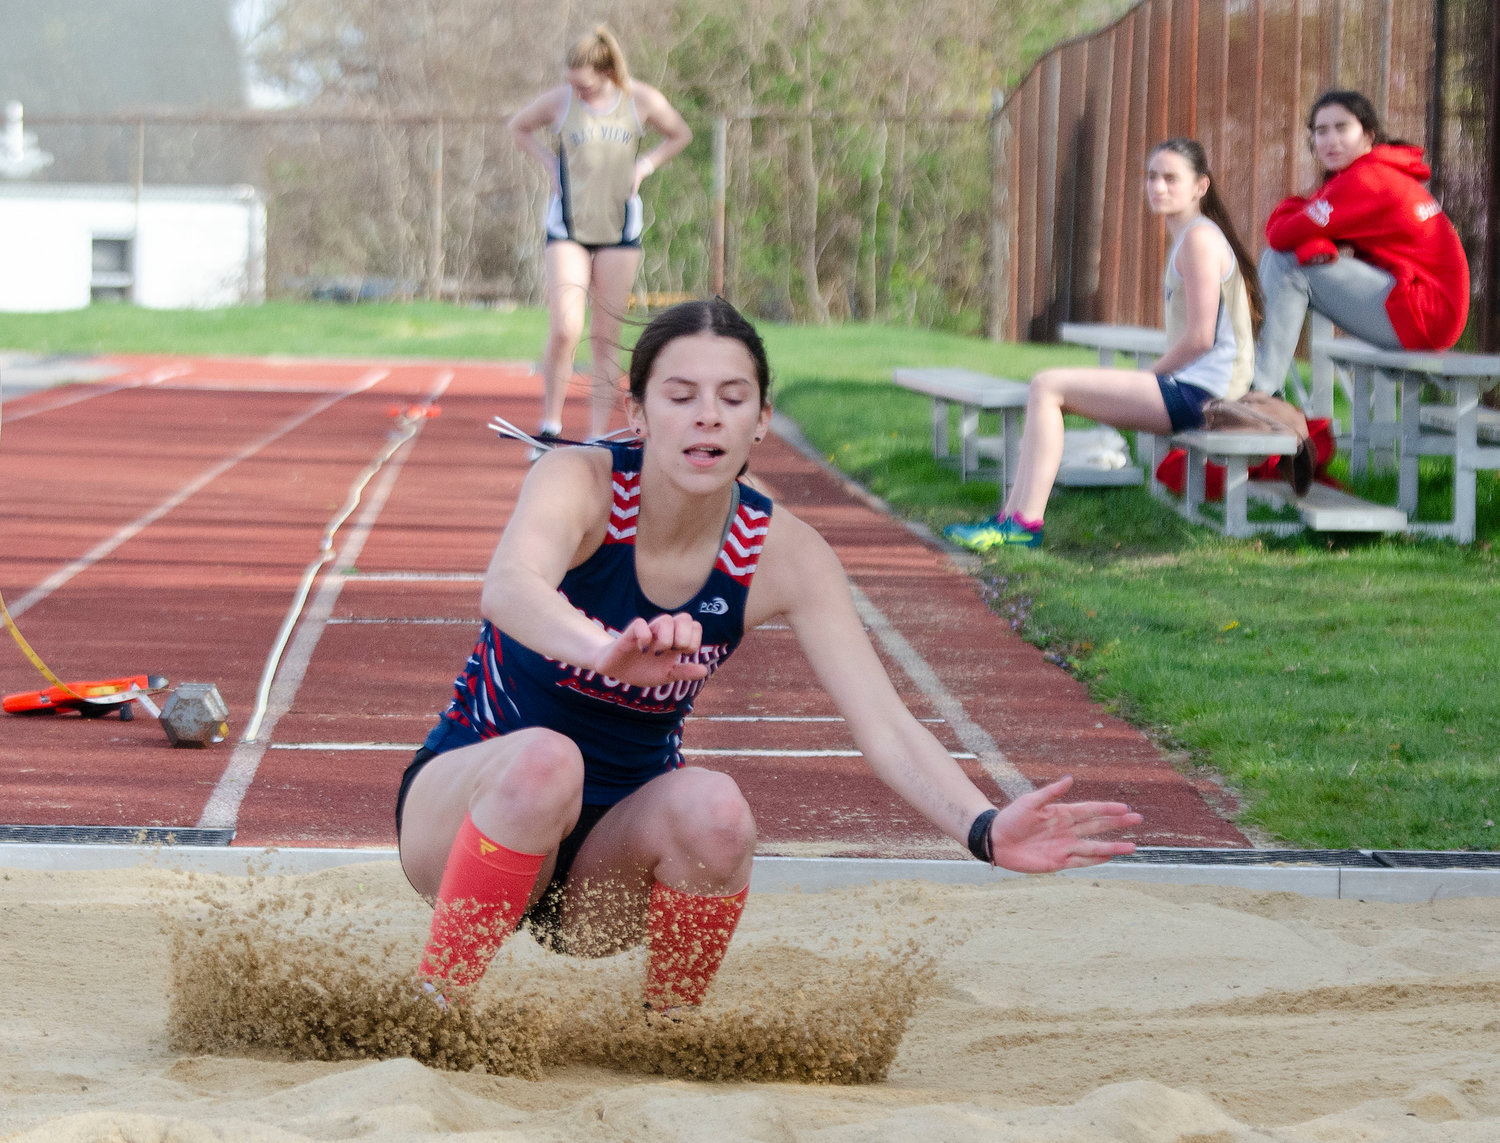 Katie Spaner splash-lands in the sand pit during the long jump event.